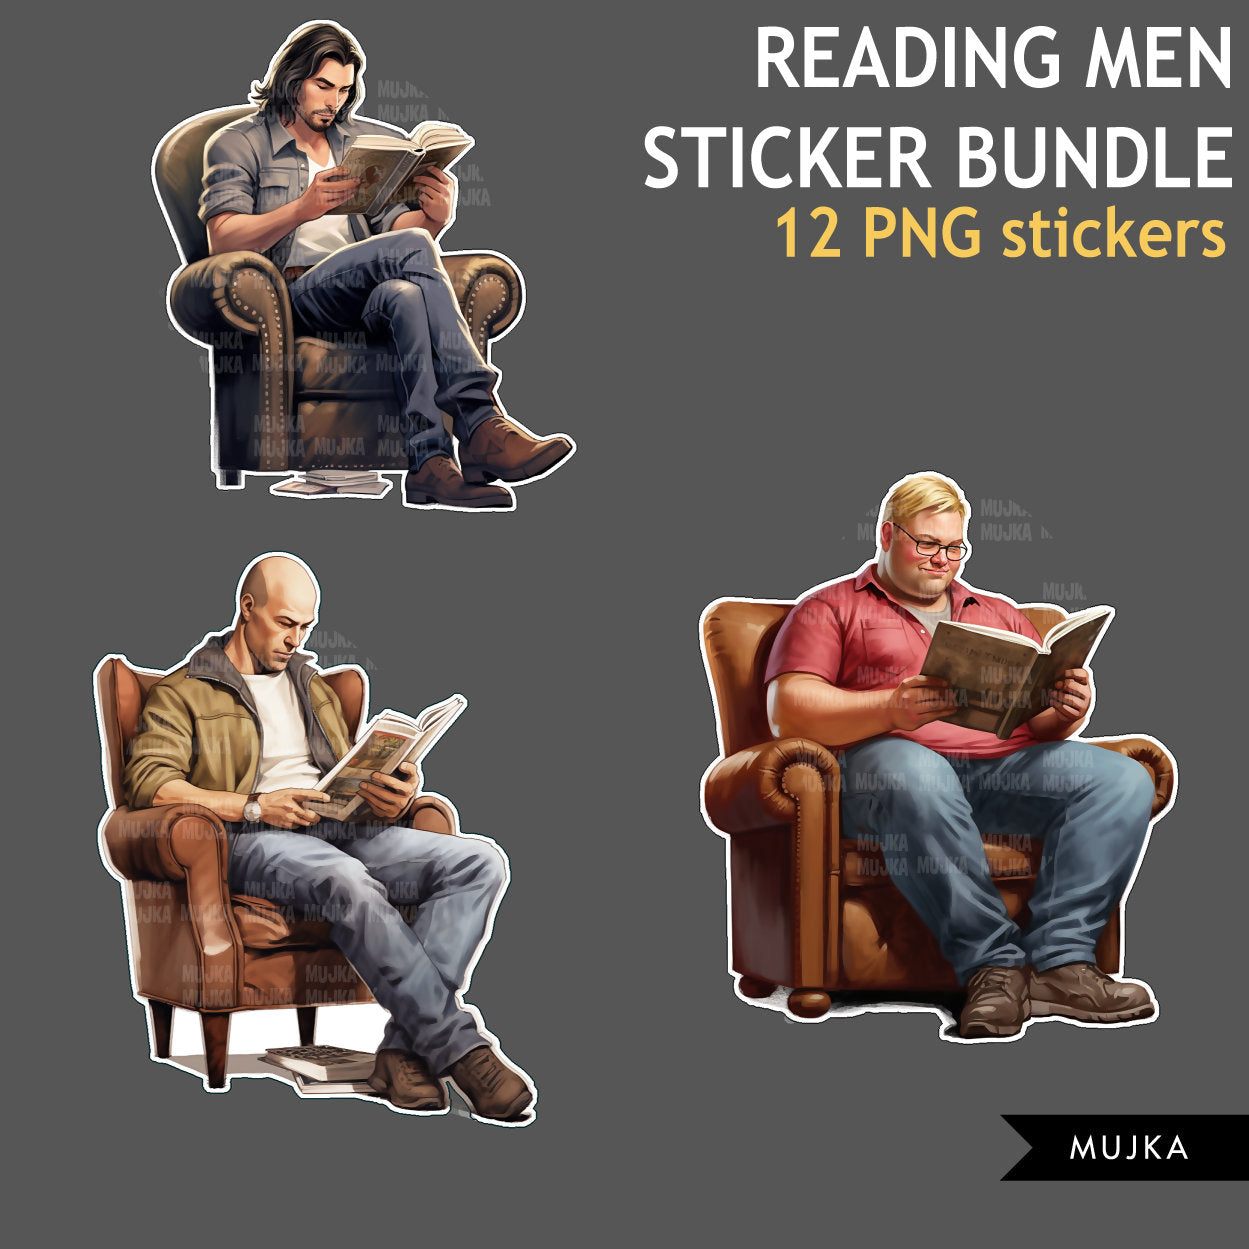 Fathers Day Bundle PNG, Bookworm png, Man digital Stickers, reading man clipart Bundle, sublimation designs, dad gifts, dad stickers